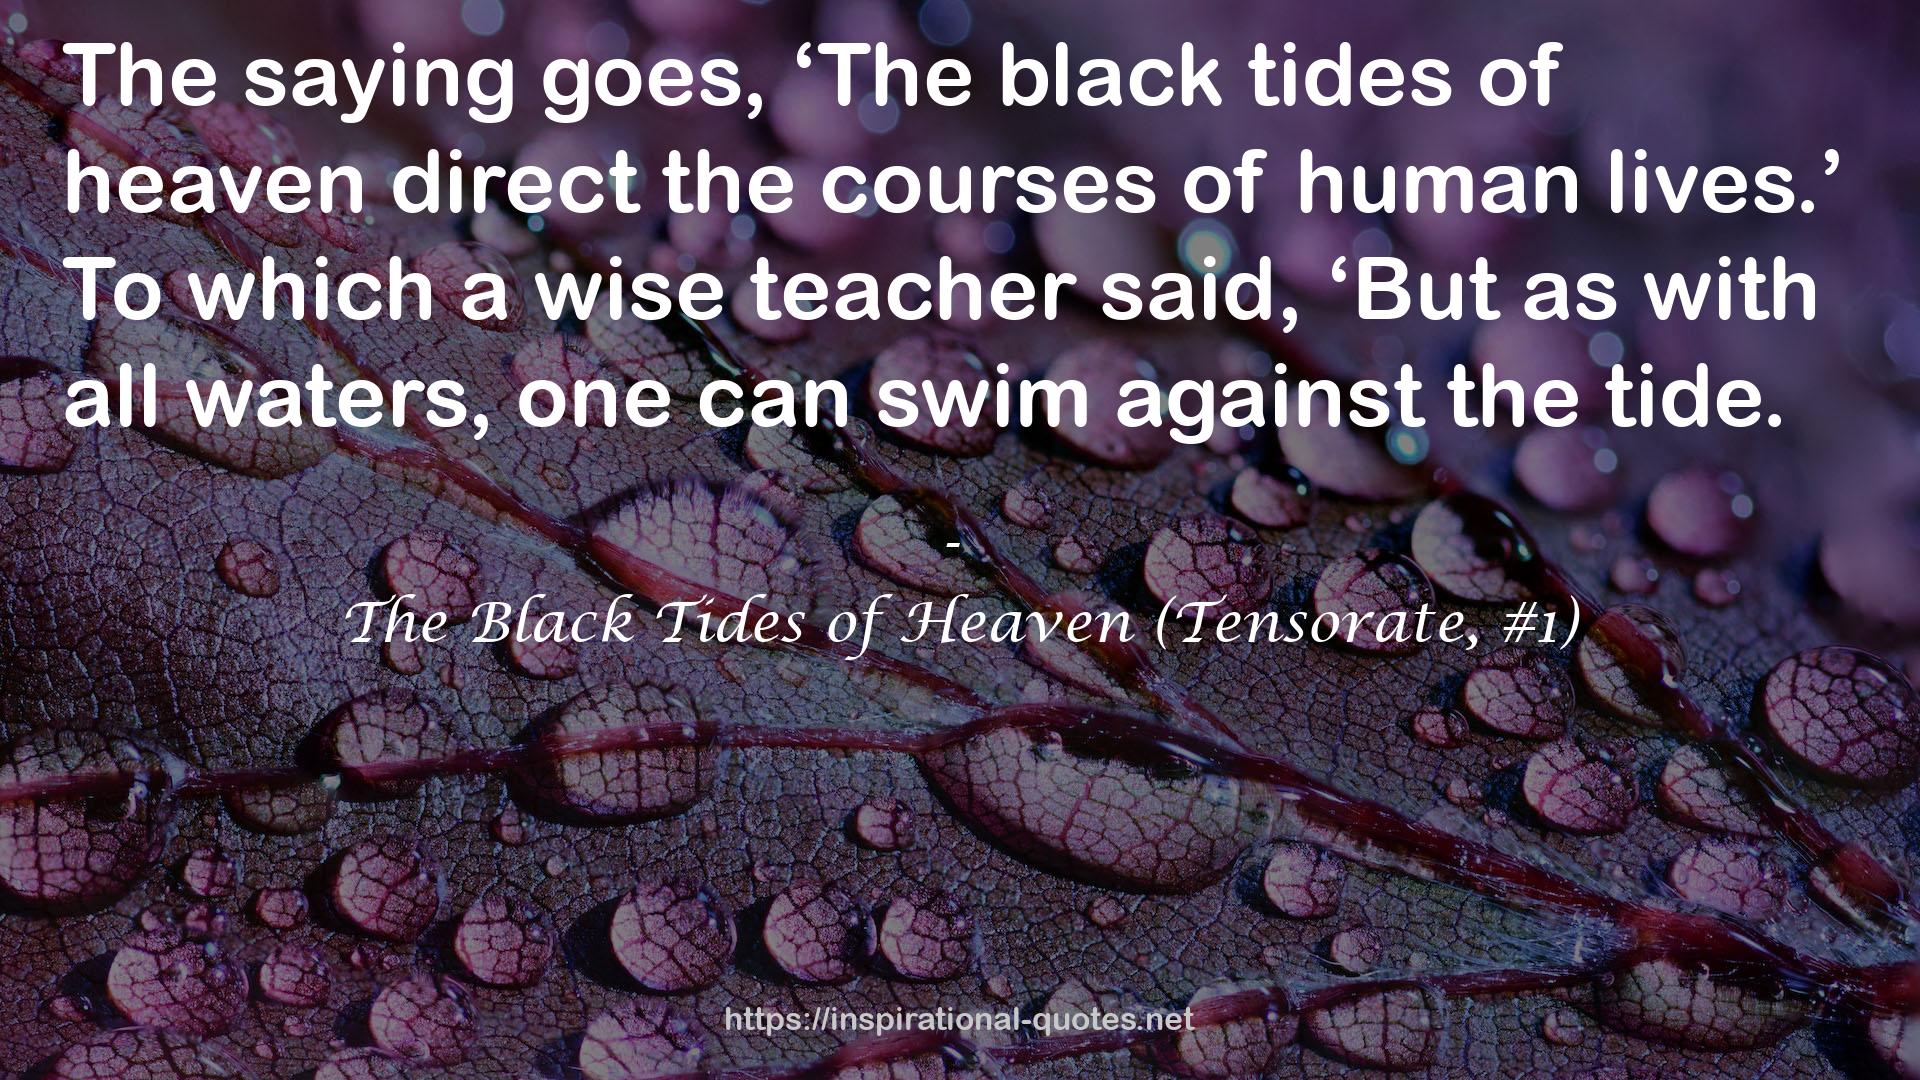 The Black Tides of Heaven (Tensorate, #1) QUOTES